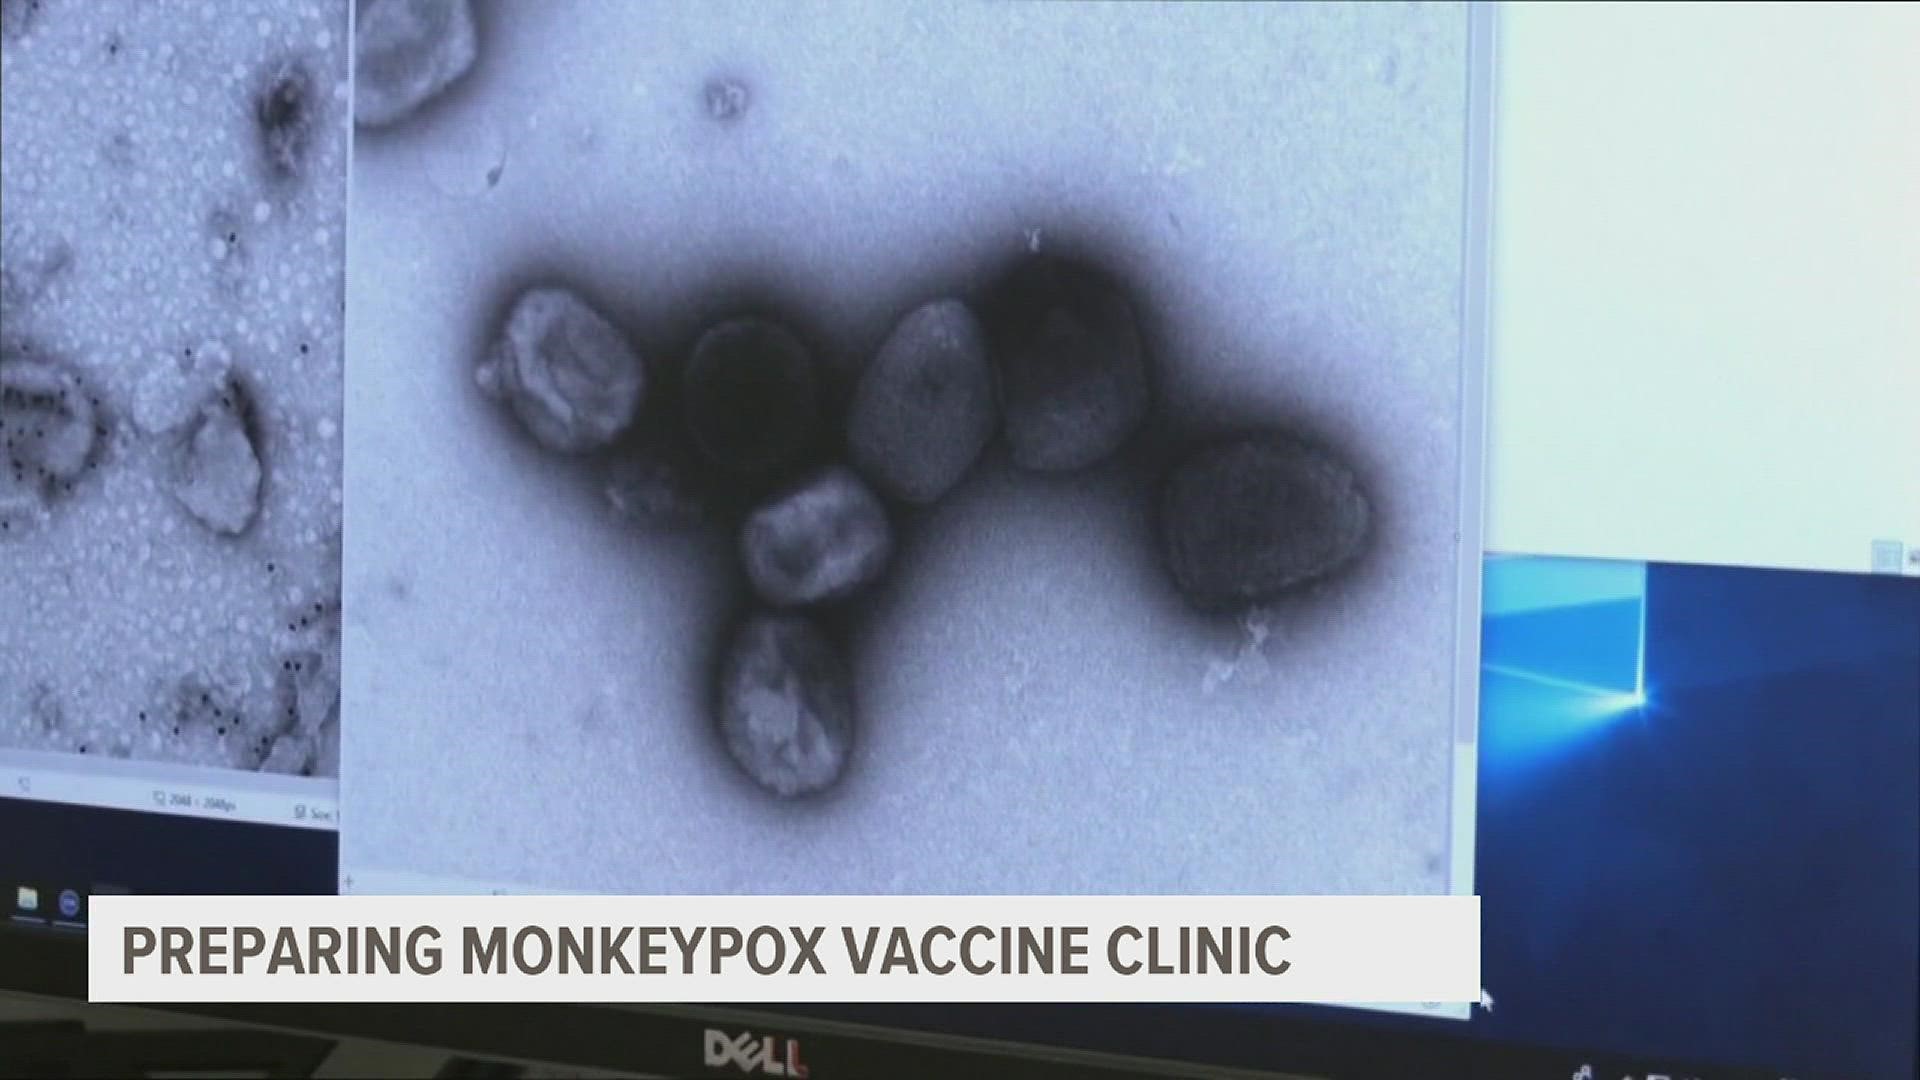 The Project of Quad Cities will be hosting a monkeypox vaccine clinic Tuesday night to help combat the 1,000 cases that have been reported in the state of Illinois.